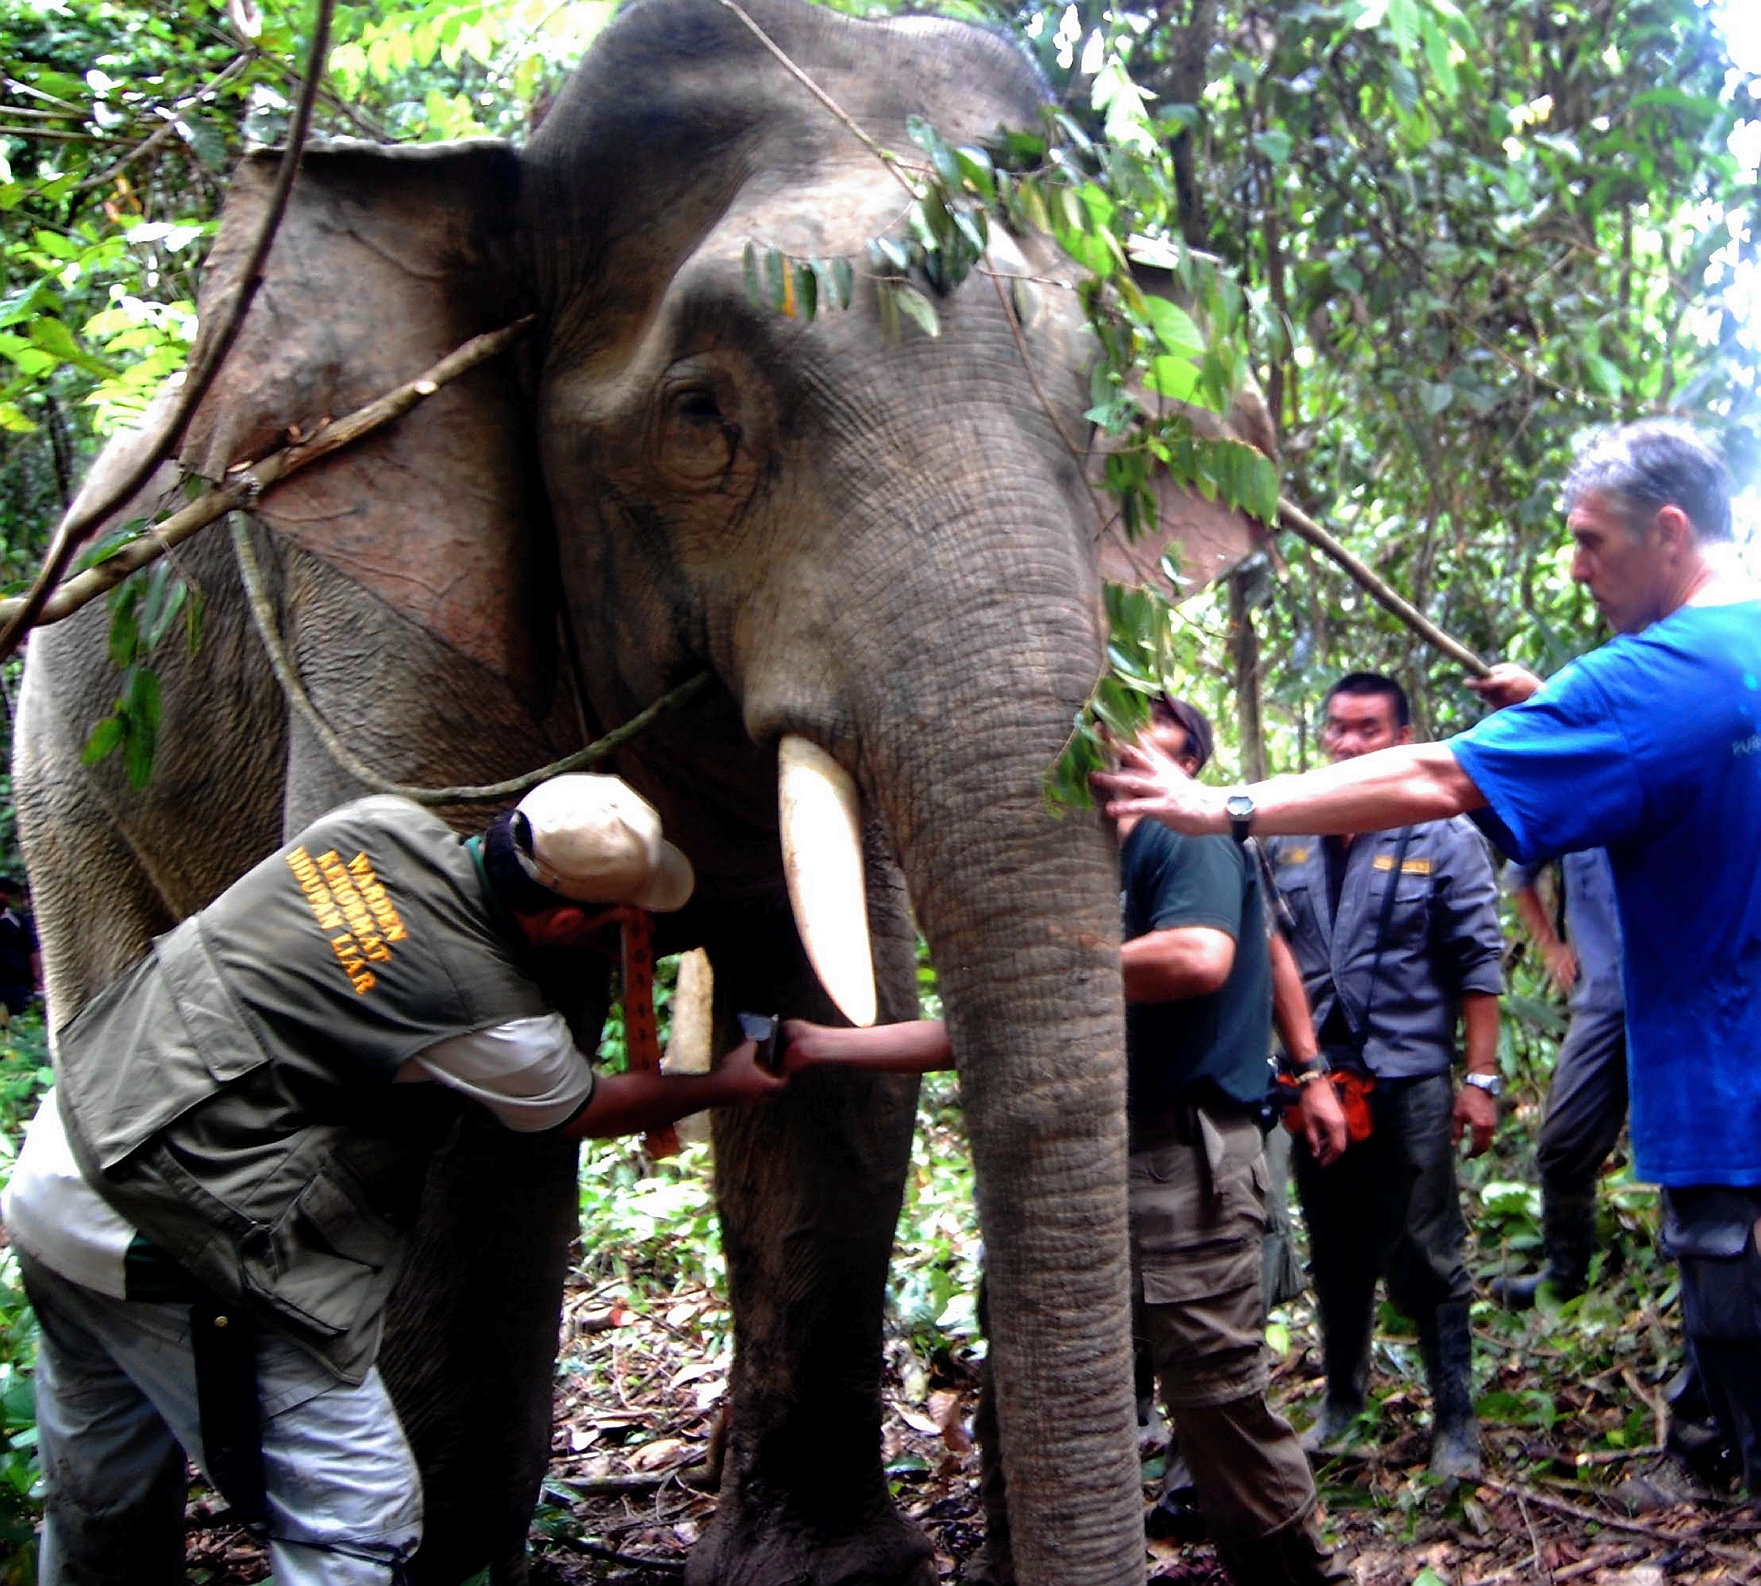 Putting an end to man-elephant conflicts in Sabah